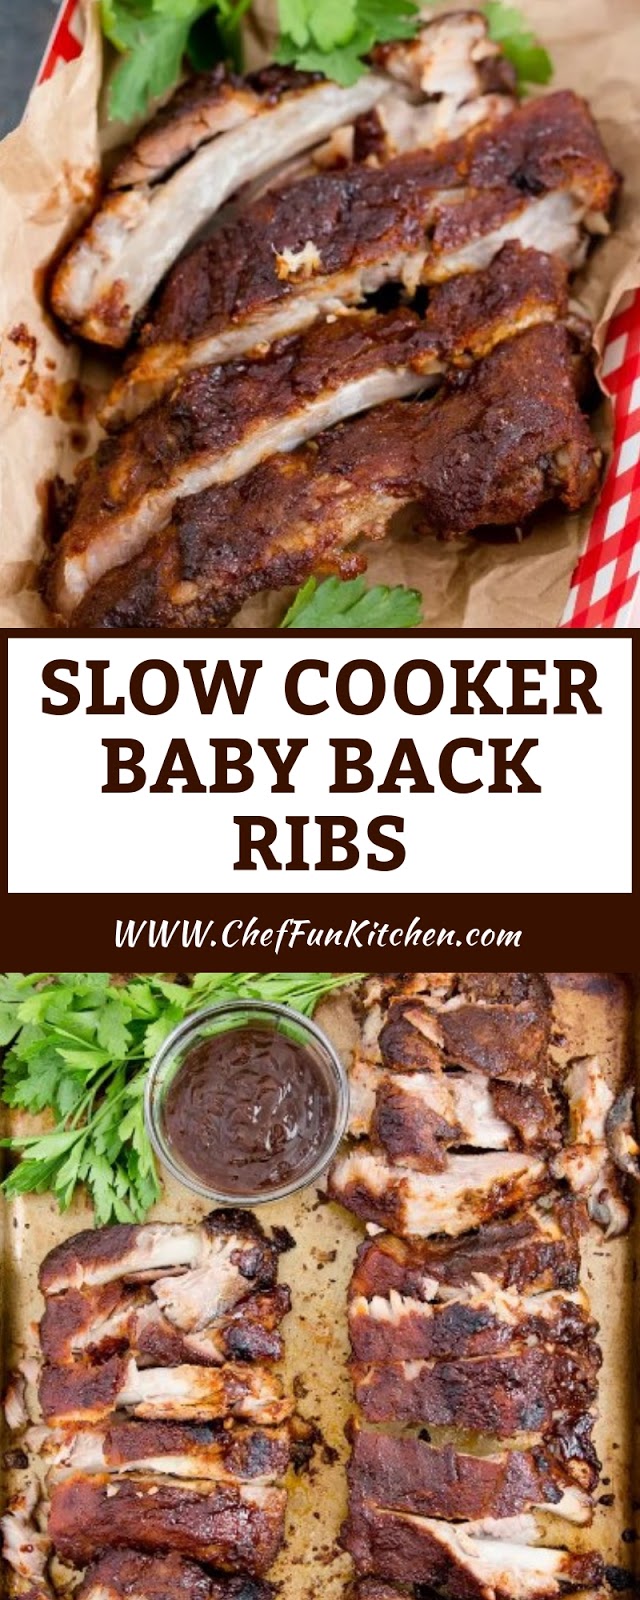 SLOW COOKER BABY BACK RIBS